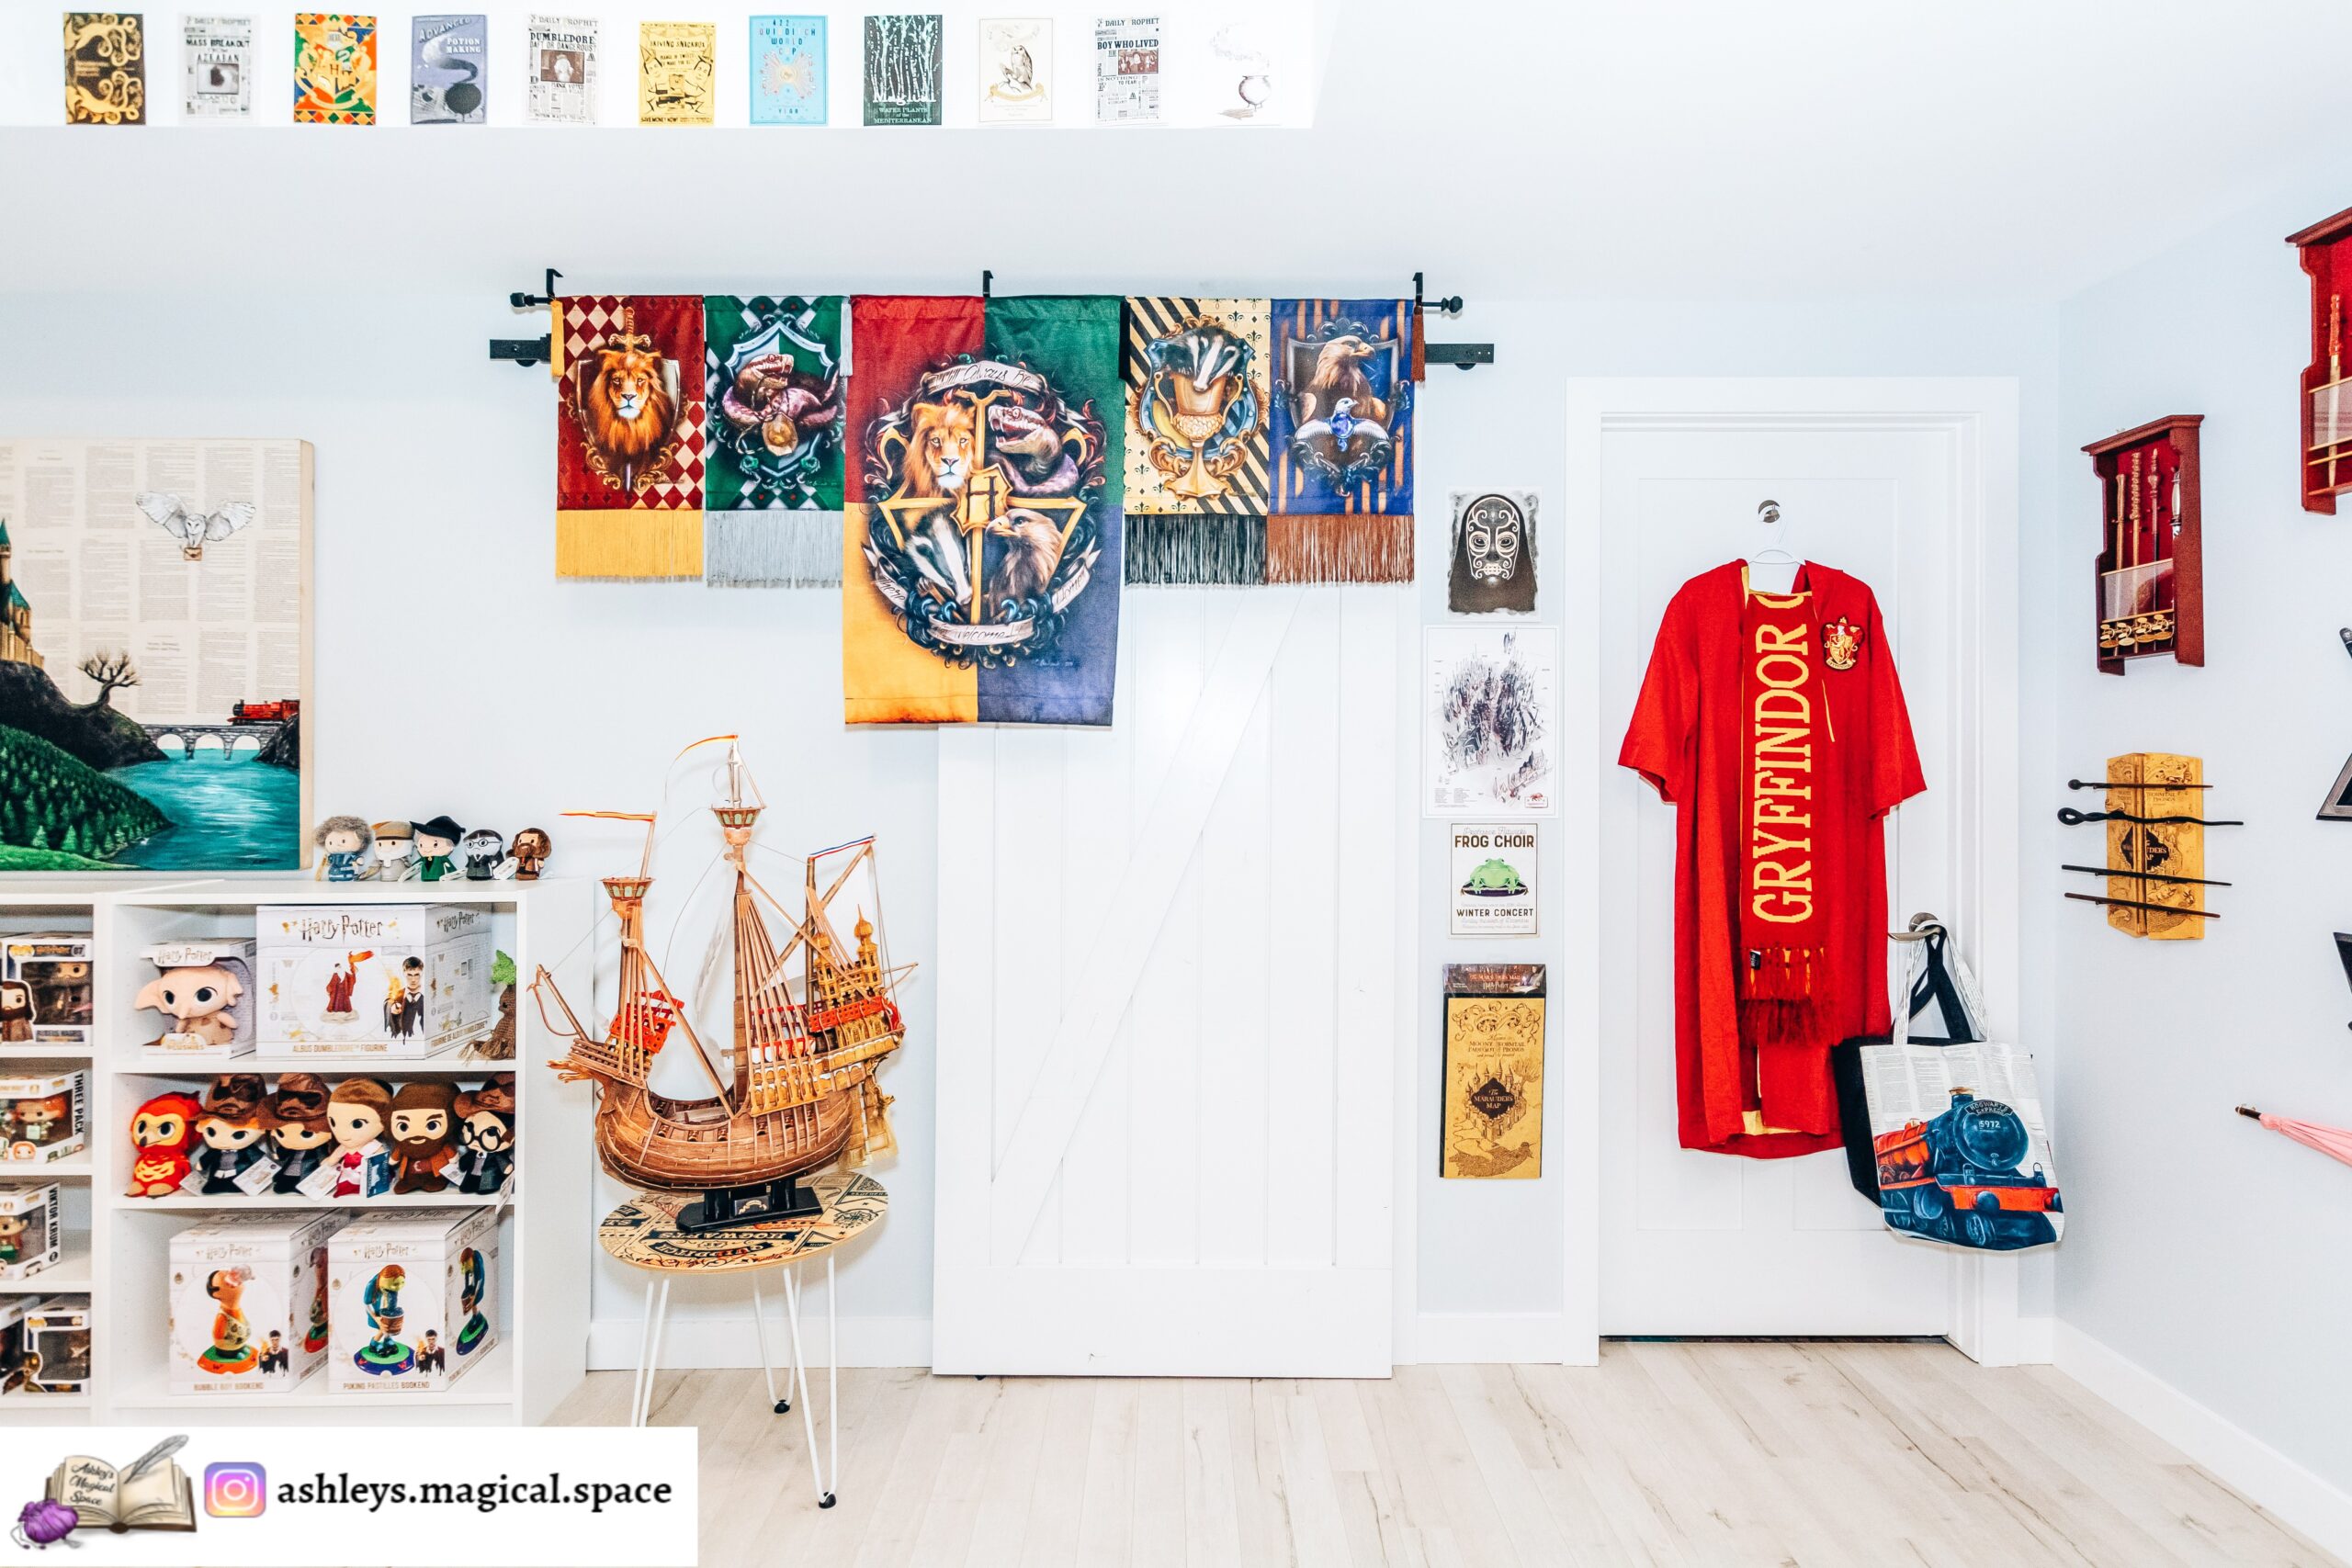 Ashley’s magical “Harry Potter” space is filled with merchandise and Gryffindor spirit.